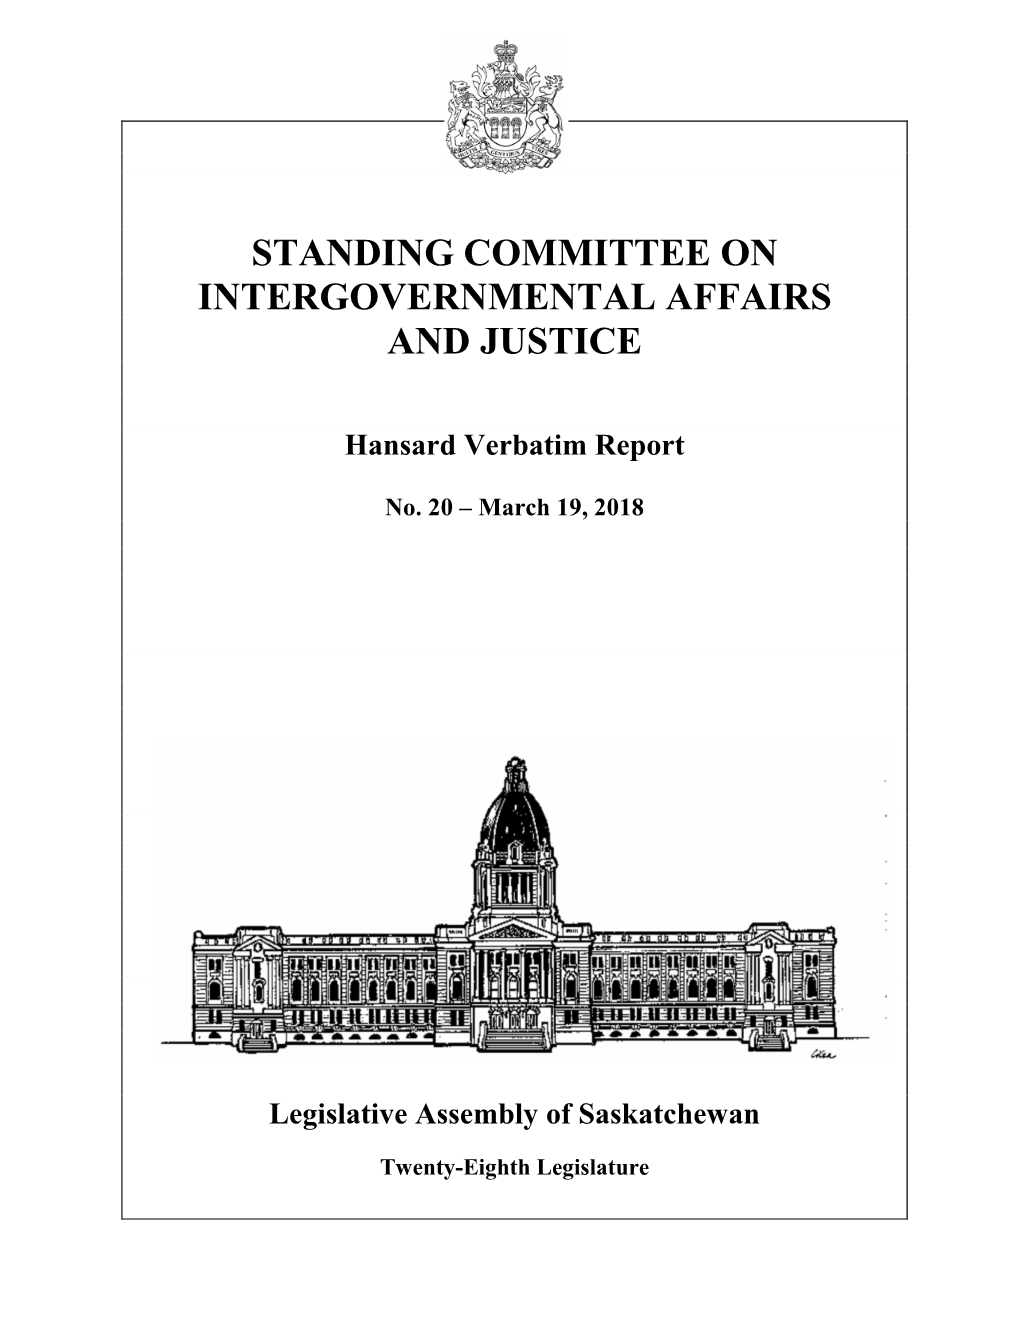 March 19, 2018 Intergovernmental Affairs and Justice Committee